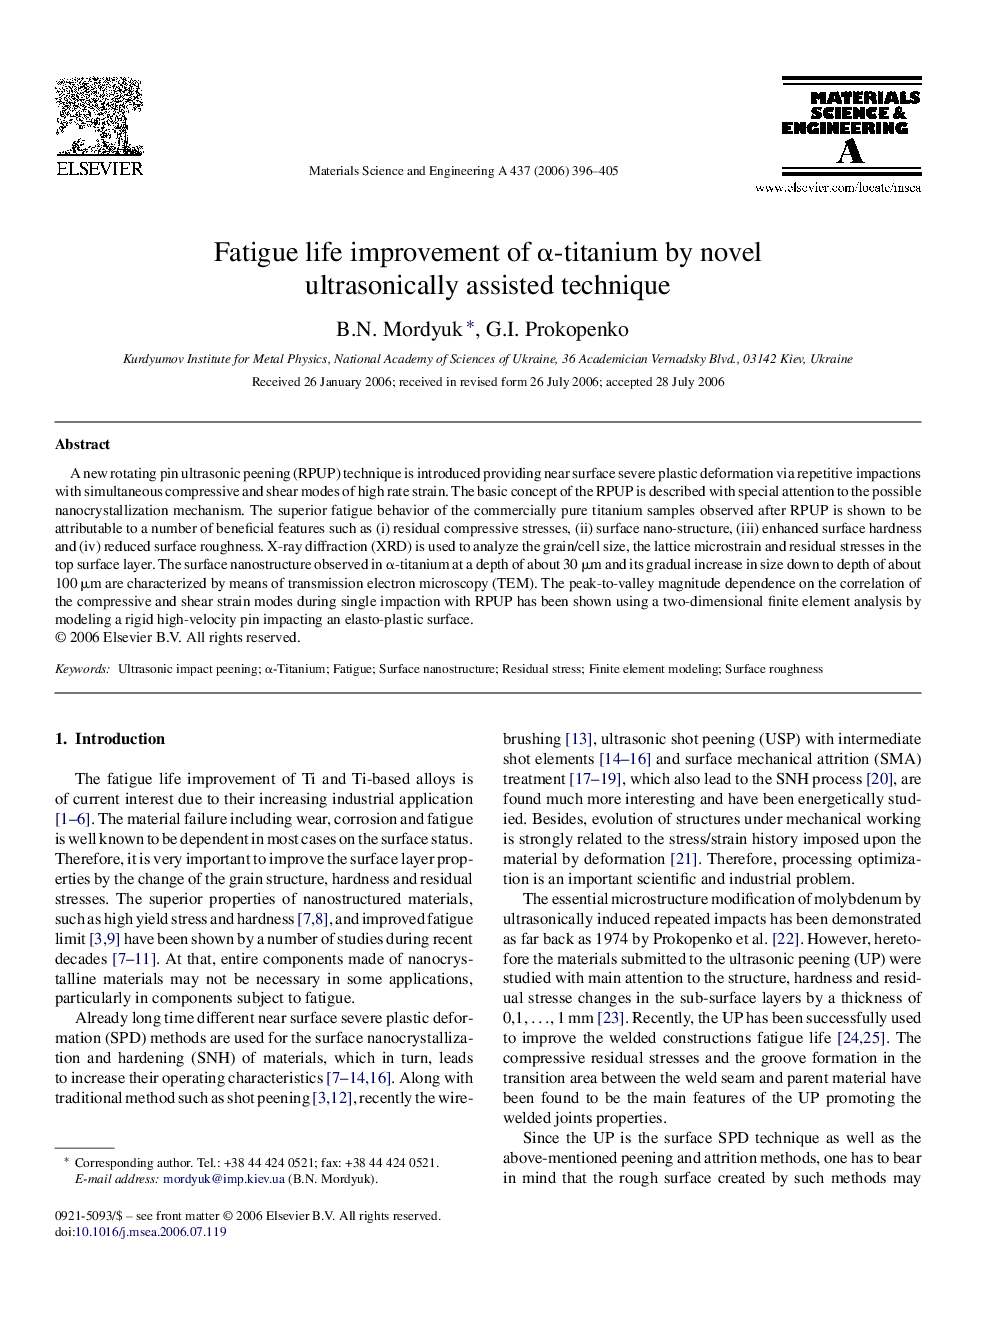 Fatigue life improvement of α-titanium by novel ultrasonically assisted technique